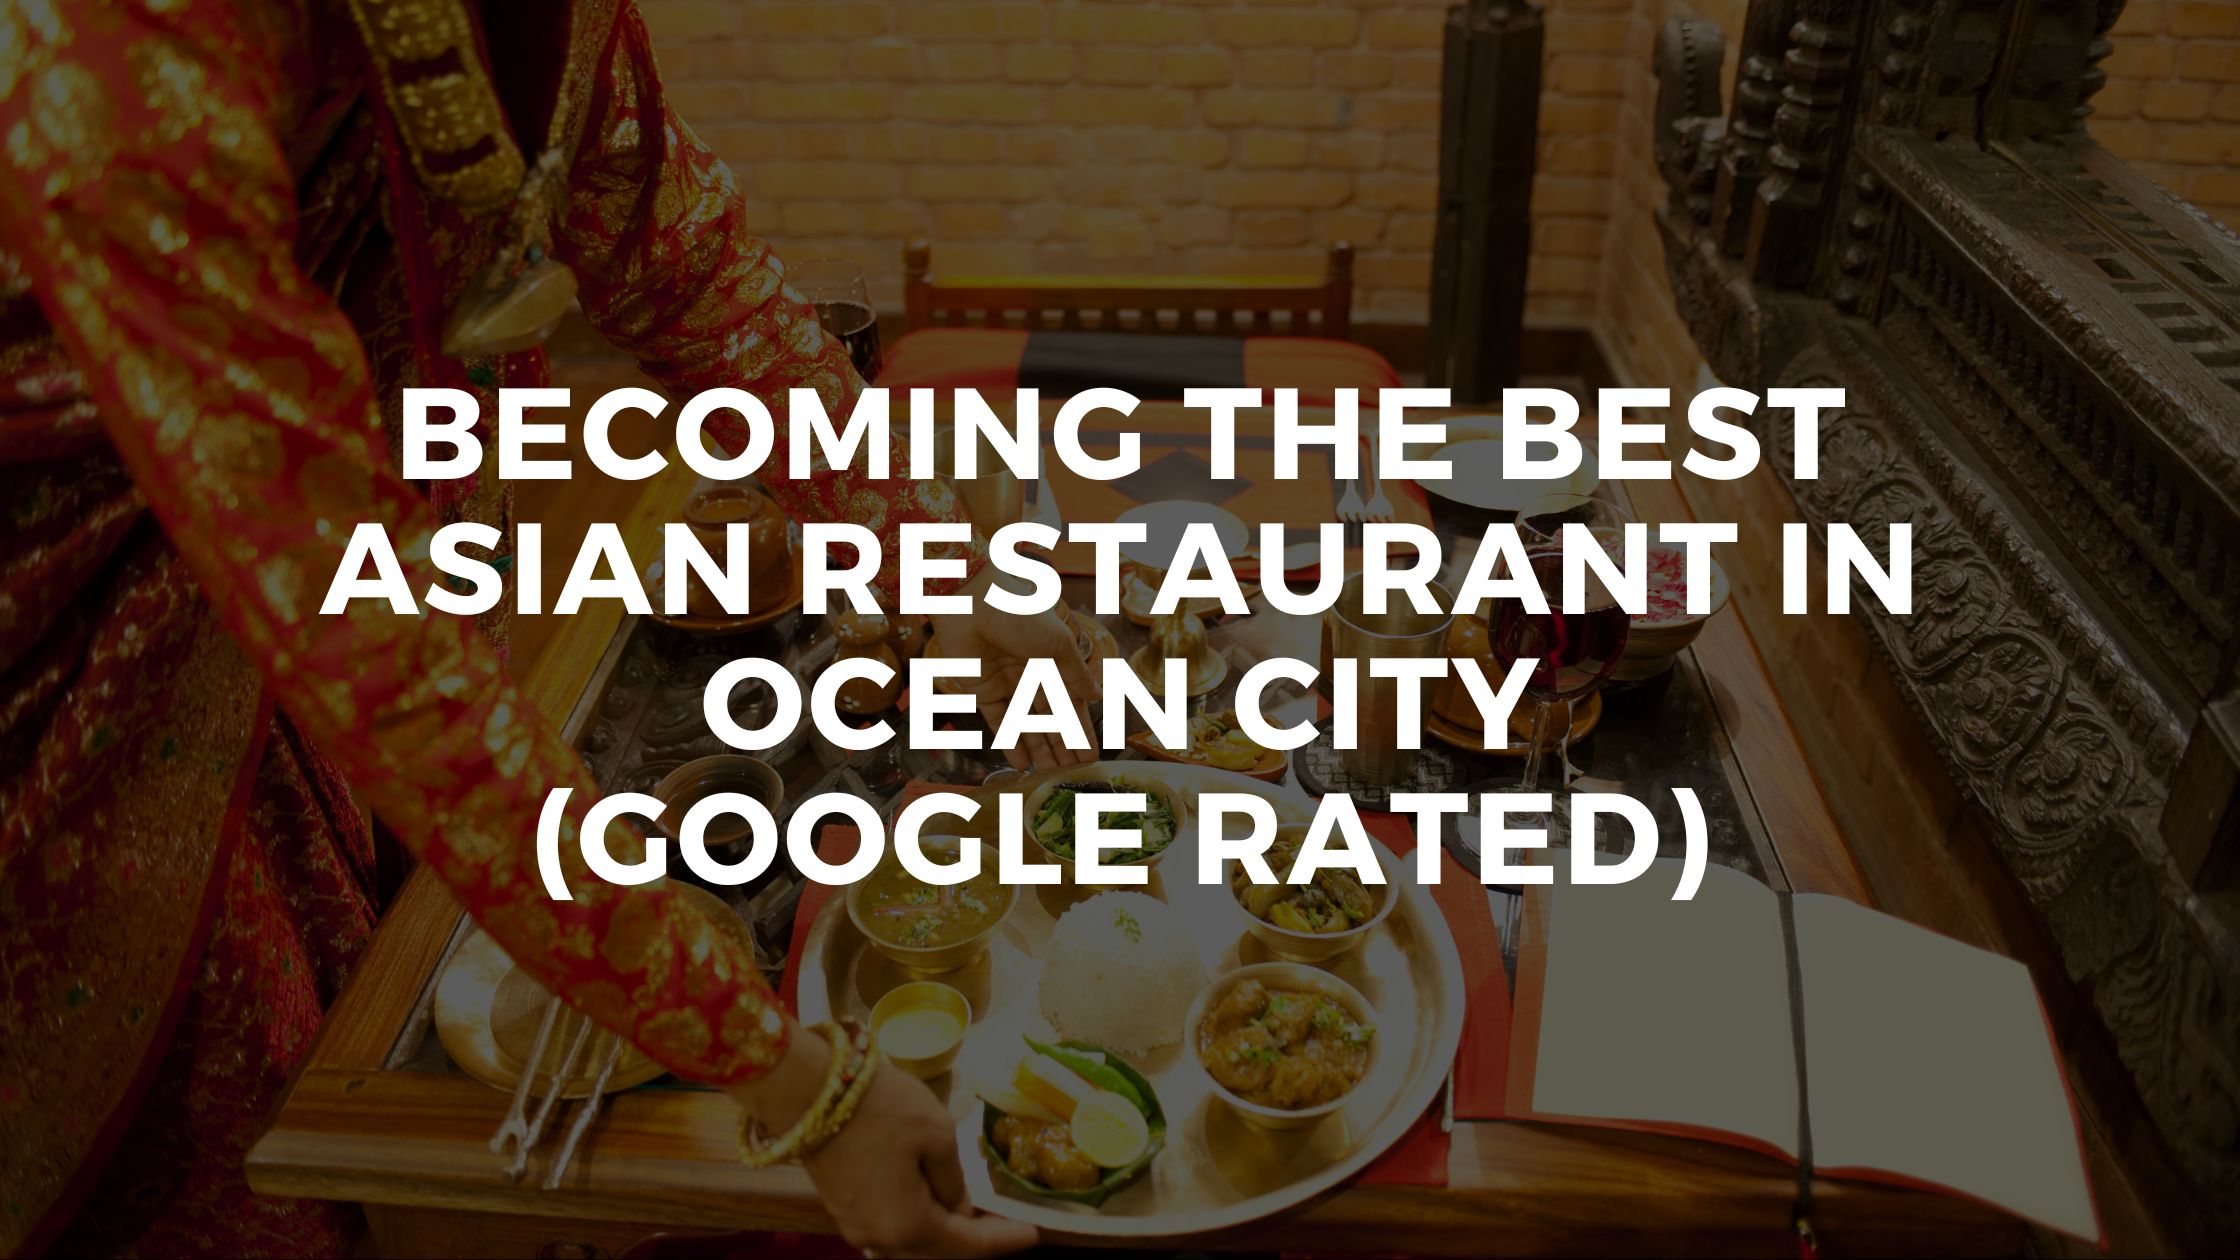 Becoming The Best Asian Restaurant In Ocean City (Google Rated)